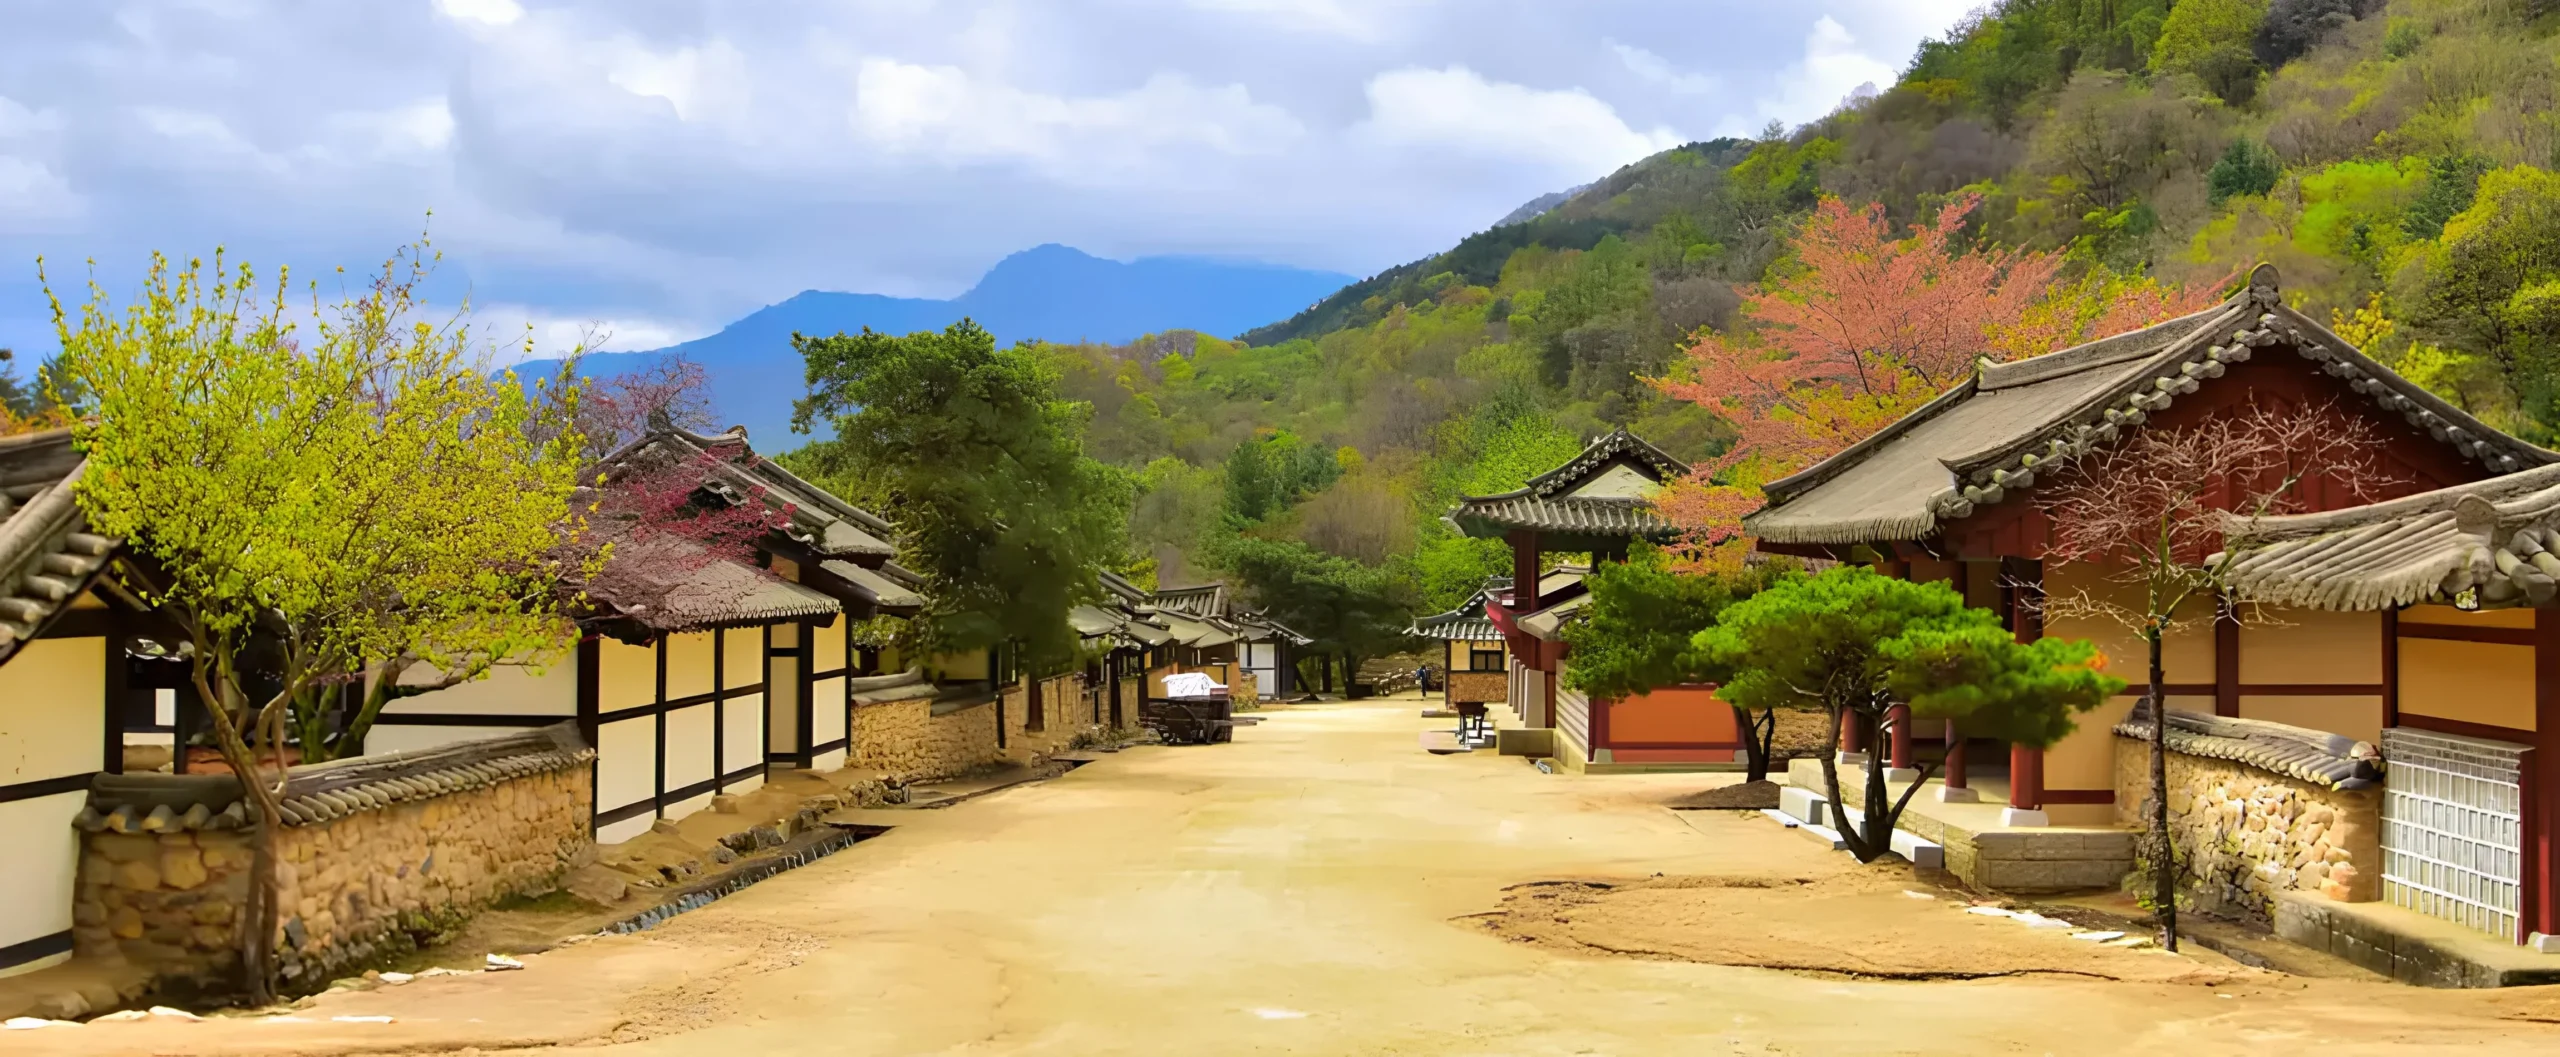 Mungyeong Pottery and Rural Landscapes